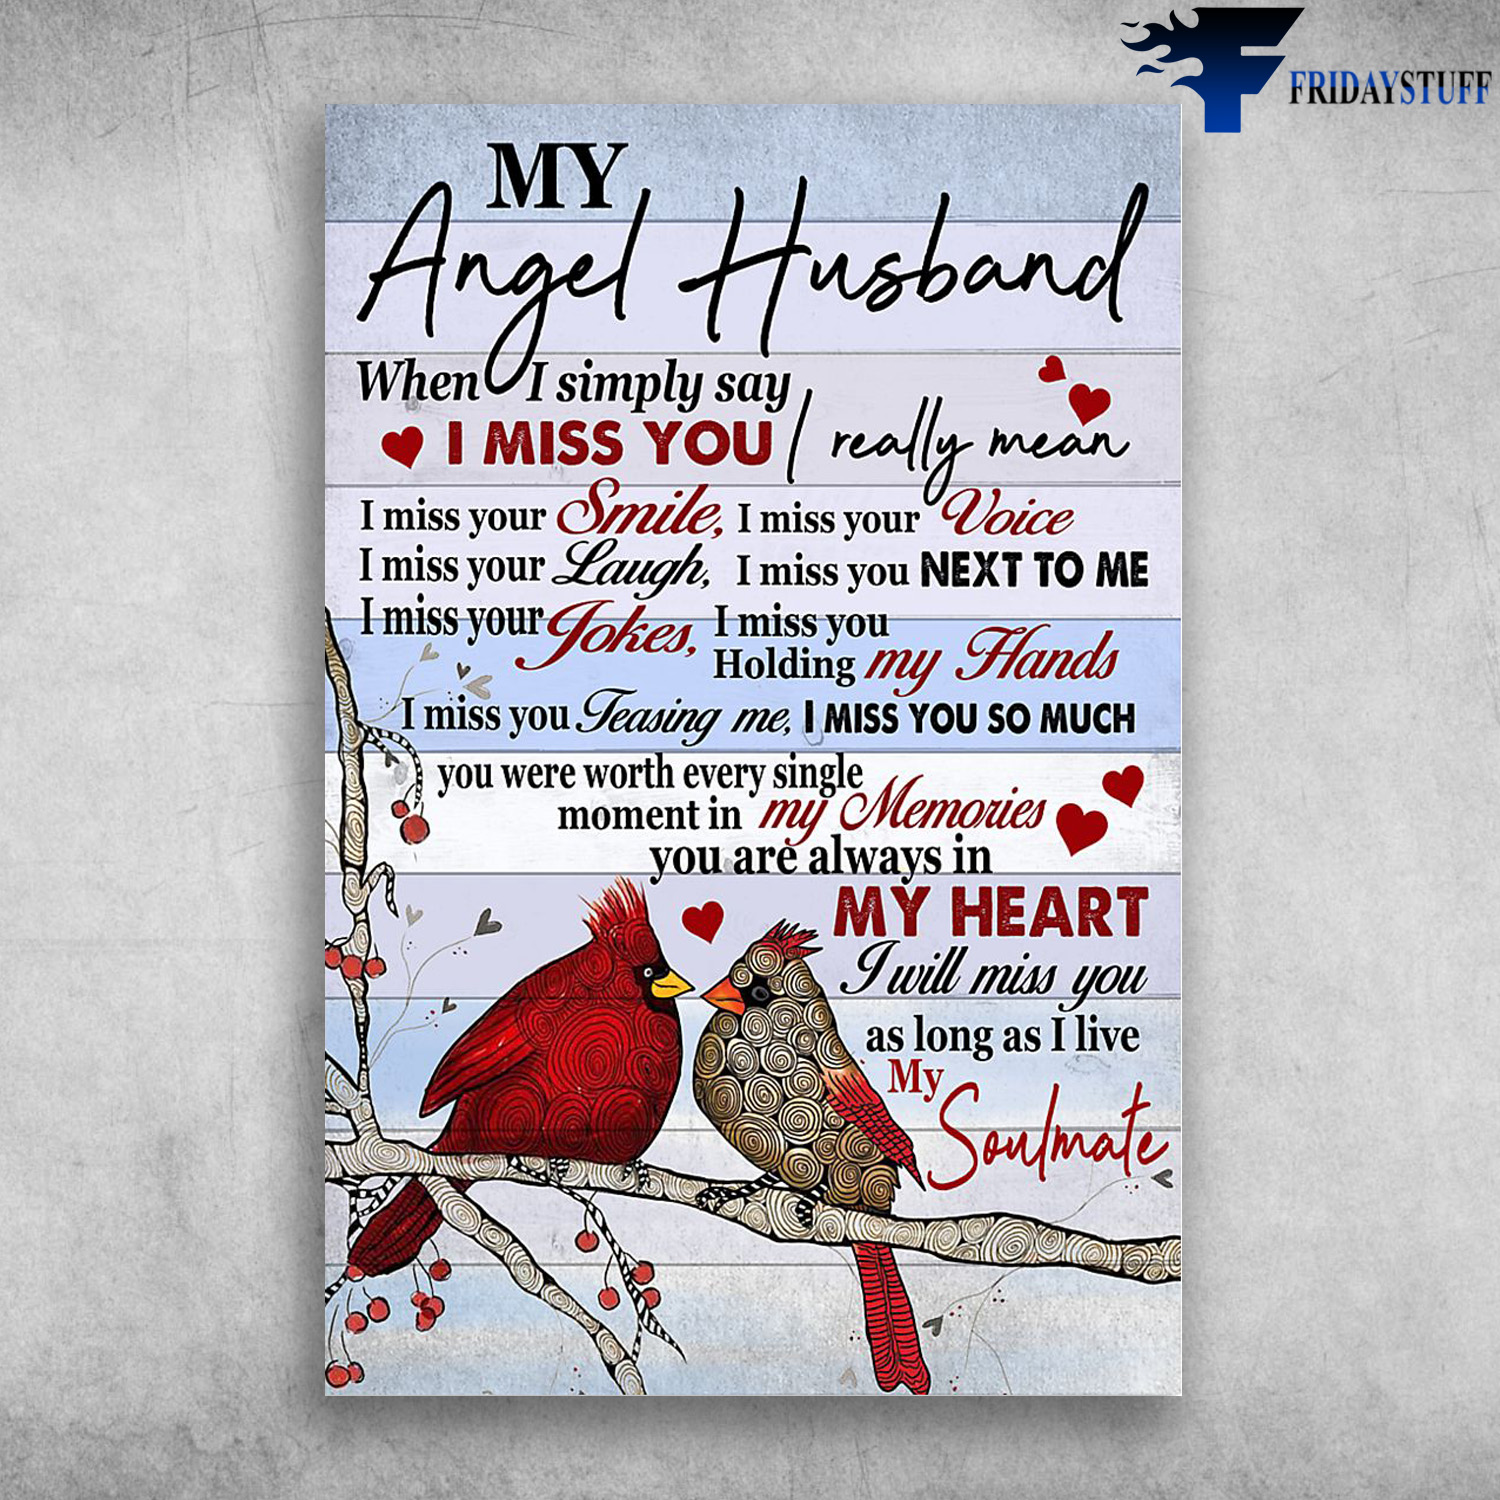 Cardinal Birds - My Angel Husband, When I Simply Say, I Miss You, I Really Mean, I Miss Your Smile